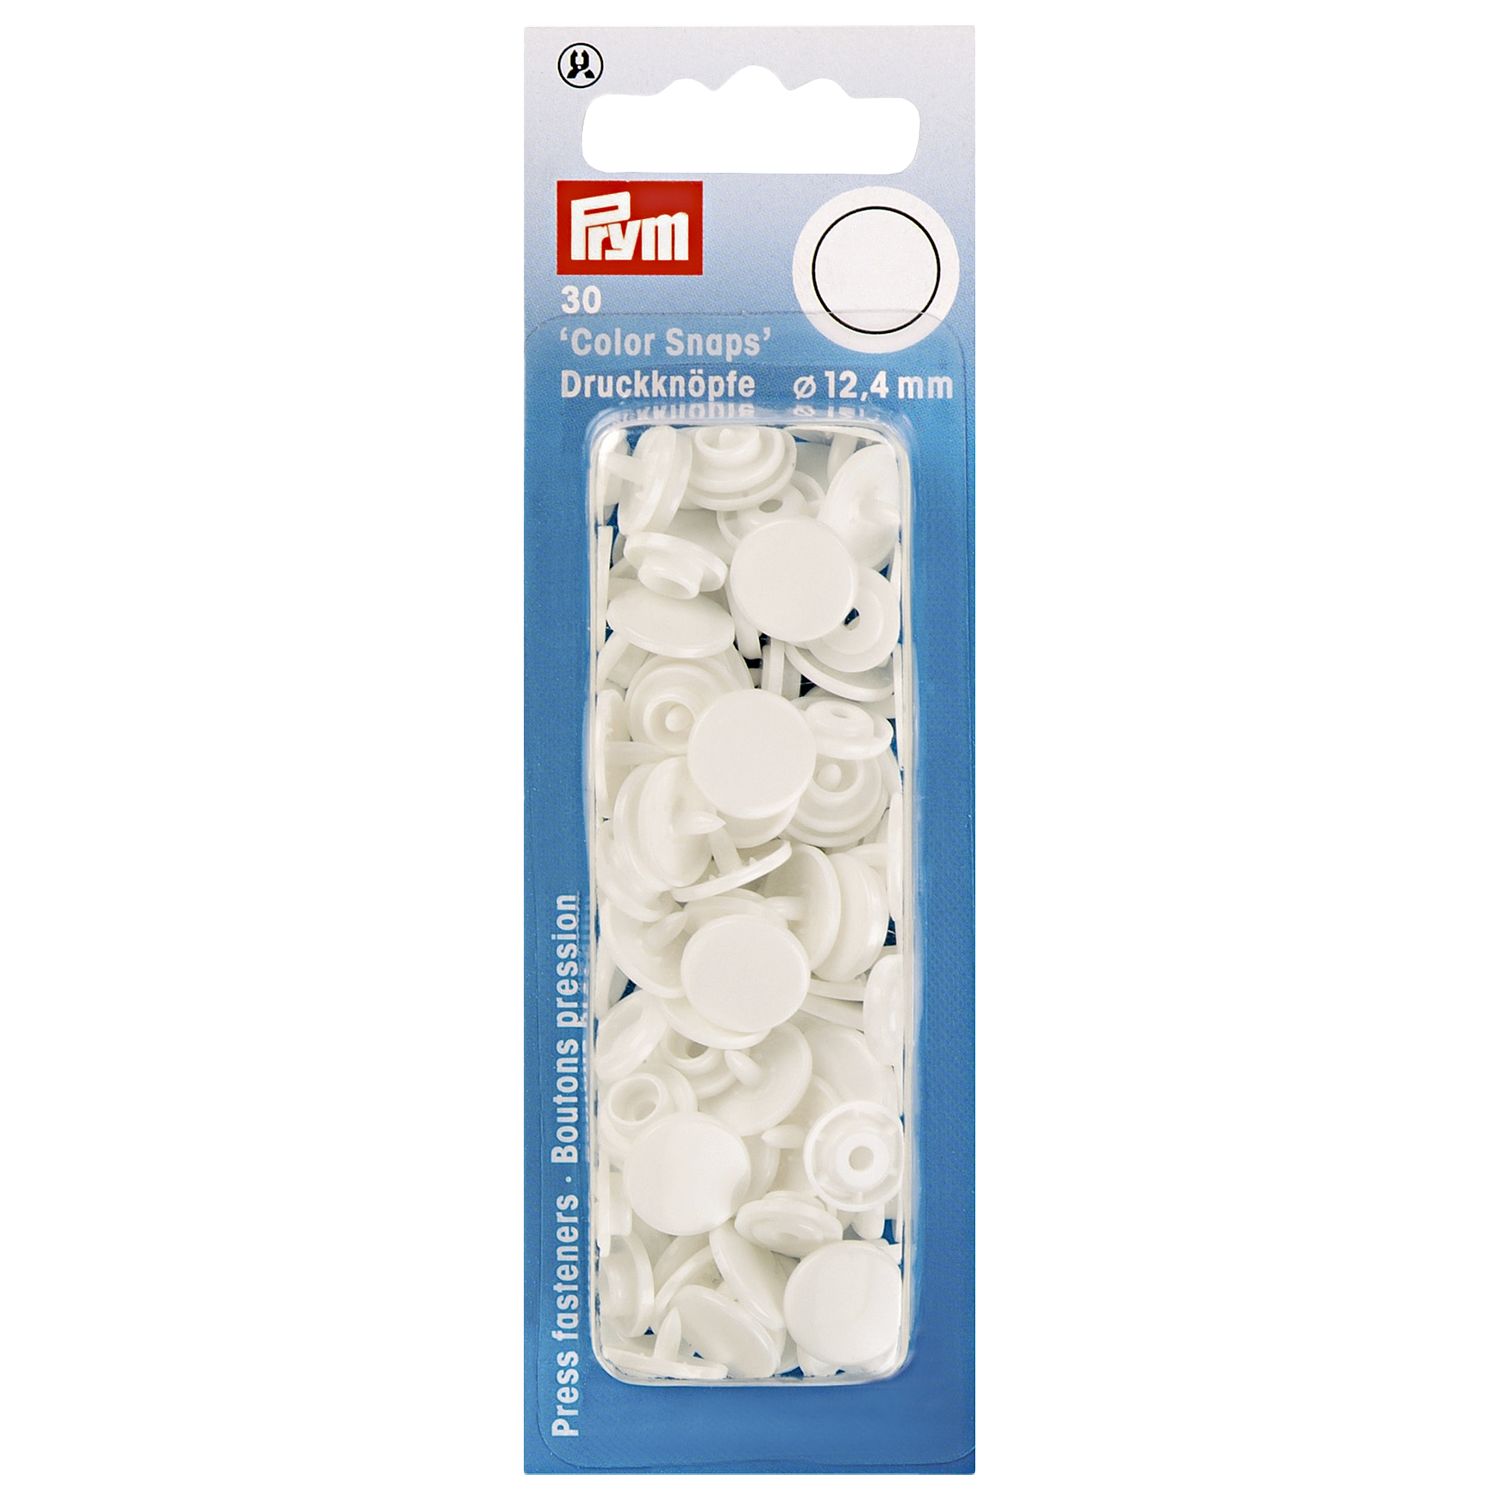 Prym Color Snaps, Pack of 30, White